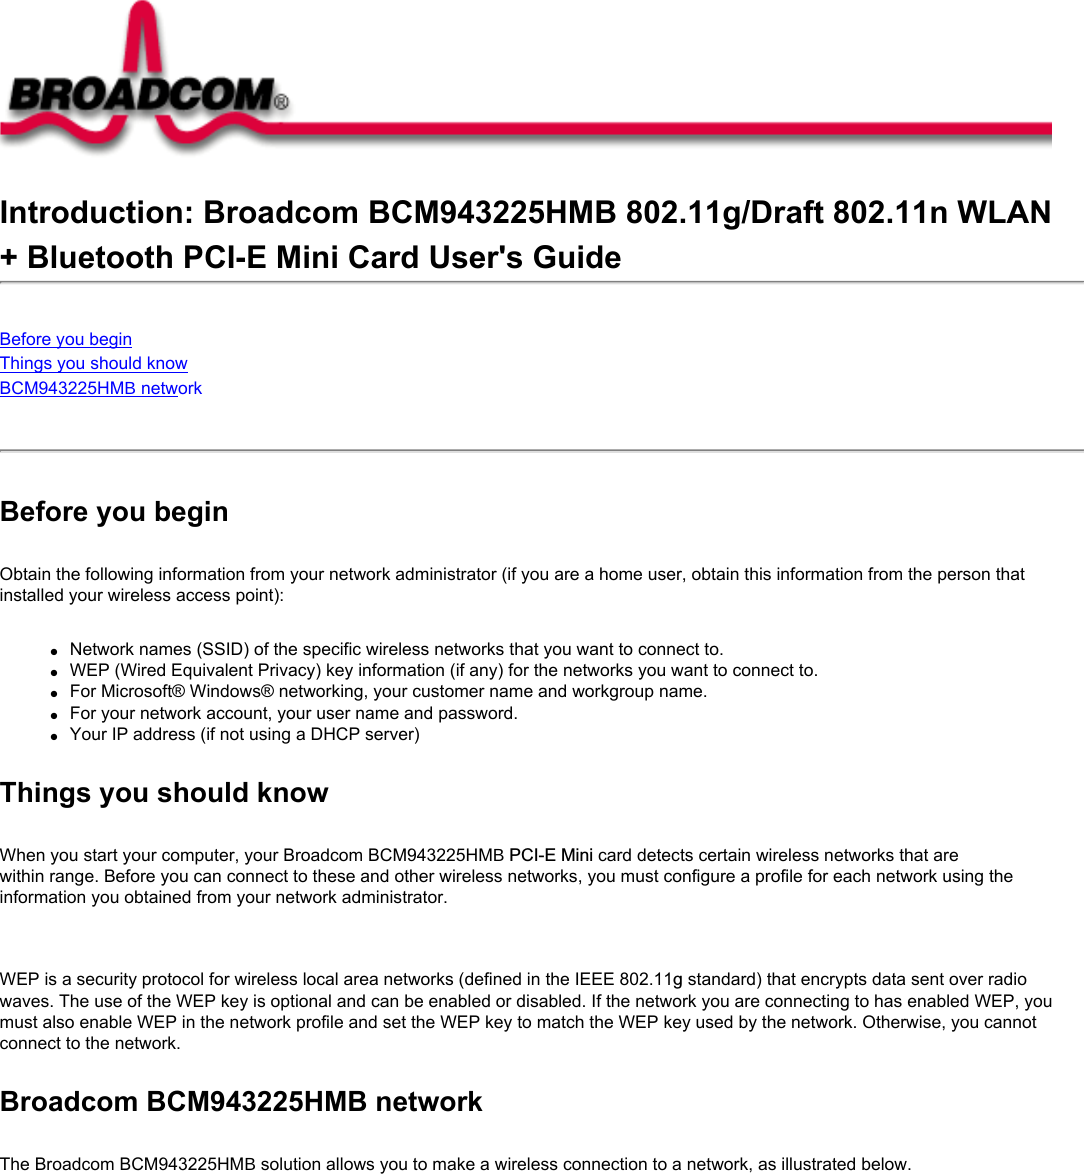 Introduction: Broadcom BCM943225HMB 802.11g/Draft 802.11n WLAN+ Bluetooth PCI-E Mini Card User&apos;s GuideBefore you beginThings you should knowBCM943225HMB network Before you beginObtain the following information from your network administrator (if you are a home user, obtain this information from the person that installed your wireless access point):●     Network names (SSID) of the specific wireless networks that you want to connect to.●     WEP (Wired Equivalent Privacy) key information (if any) for the networks you want to connect to.●     For Microsoft® Windows® networking, your customer name and workgroup name.●     For your network account, your user name and password.●     Your IP address (if not using a DHCP server)Things you should knowWhen you start your computer, your Broadcom BCM943225HMB PCI-E Mini card detects certain wireless networks that are within range. Before you can connect to these and other wireless networks, you must configure a profile for each network using the information you obtained from your network administrator.   WEP is a security protocol for wireless local area networks (defined in the IEEE 802.11g standard) that encrypts data sent over radio waves. The use of the WEP key is optional and can be enabled or disabled. If the network you are connecting to has enabled WEP, you must also enable WEP in the network profile and set the WEP key to match the WEP key used by the network. Otherwise, you cannot connect to the network.Broadcom BCM943225HMB networkThe Broadcom BCM943225HMB solution allows you to make a wireless connection to a network, as illustrated below.